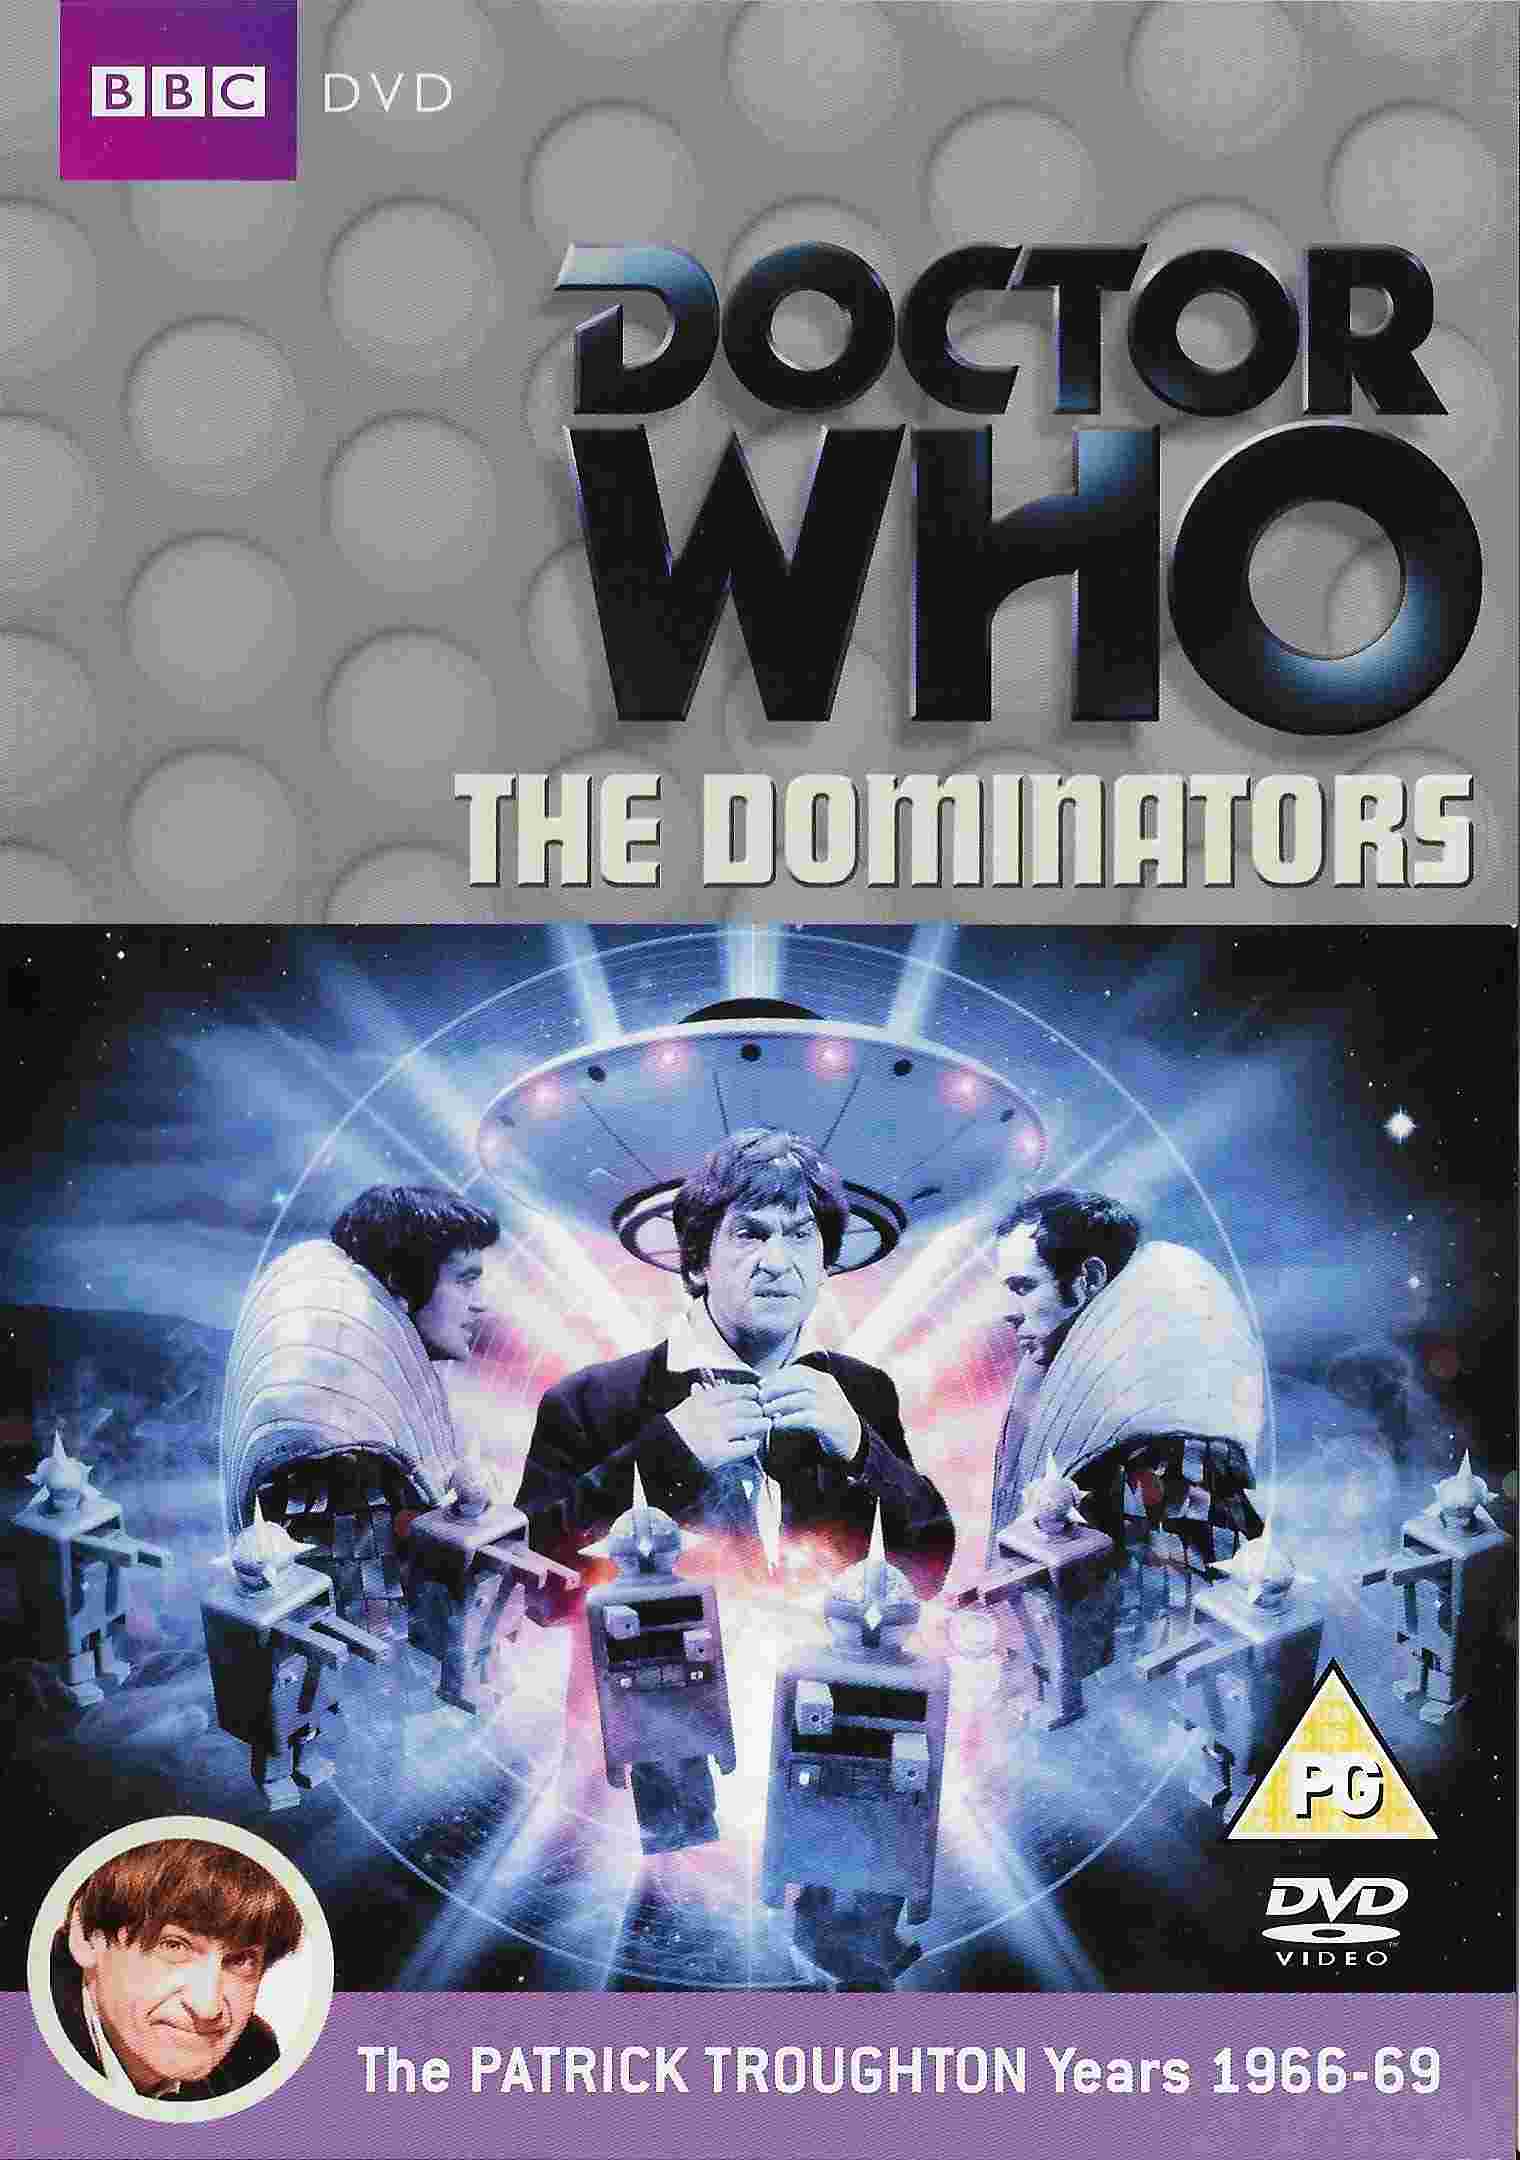 Picture of BBCDVD 2807 Doctor Who - The Dominators by artist Norman Ashby